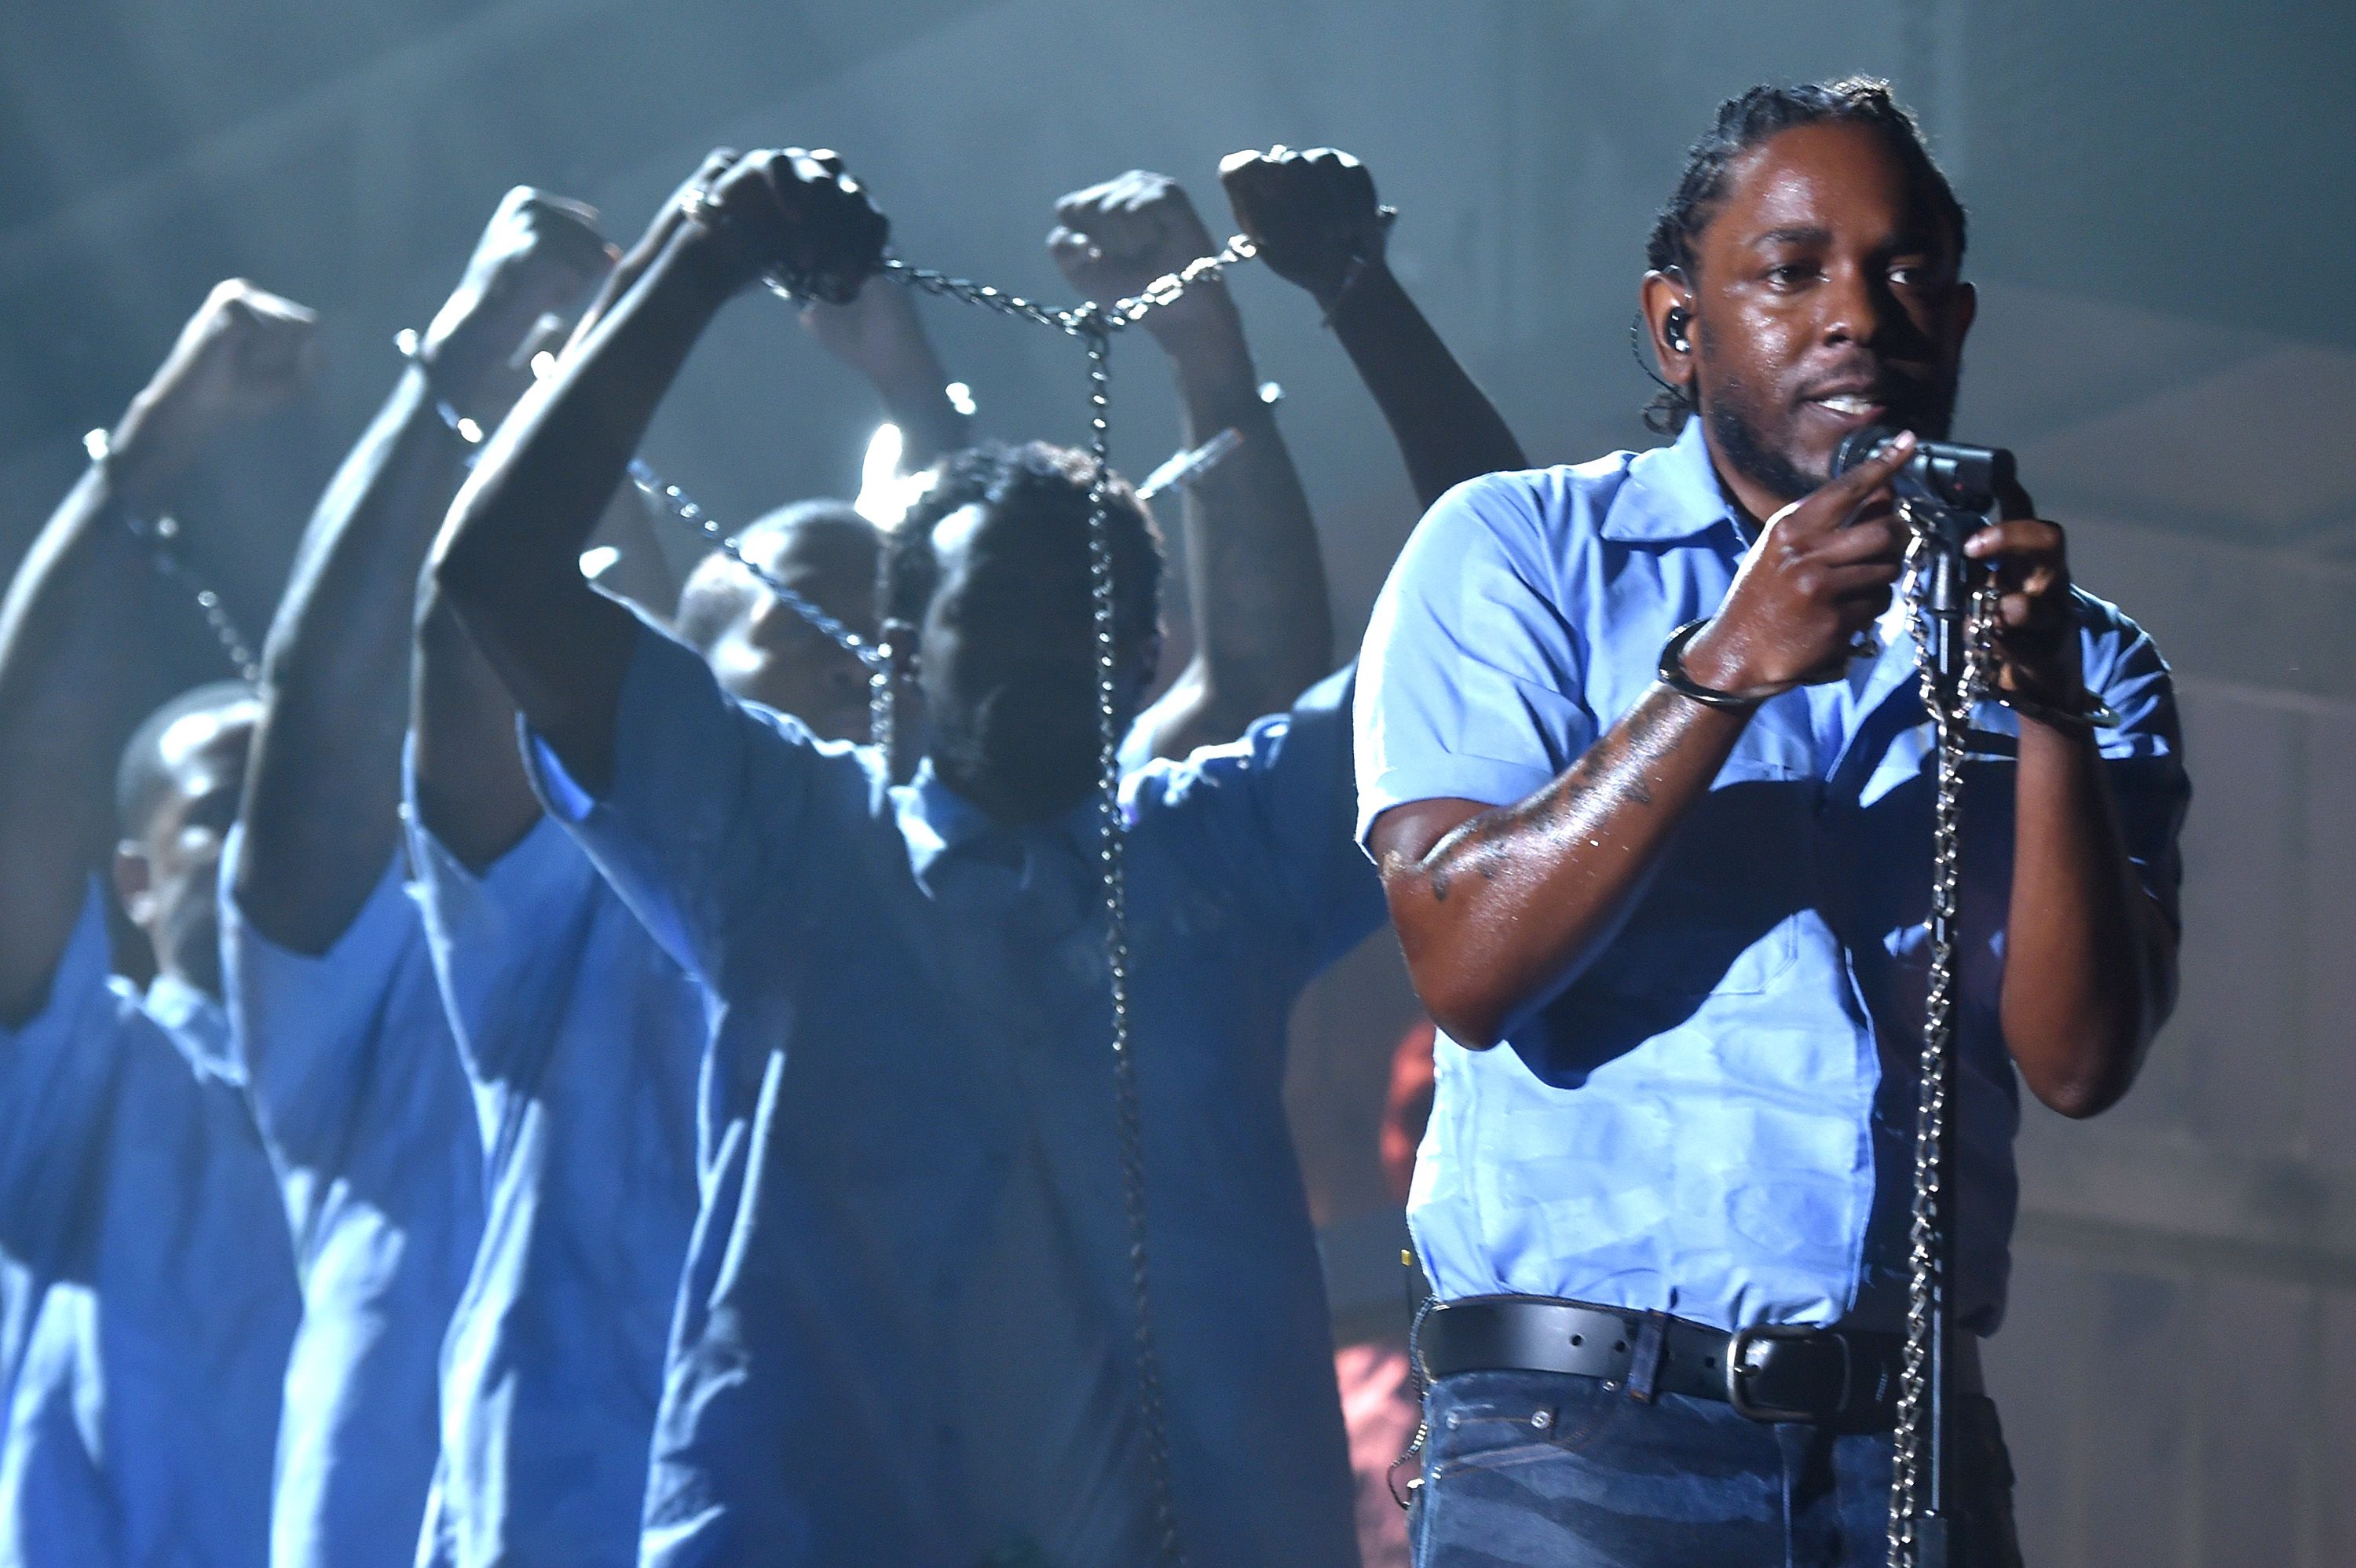 Pictured: Kendrick Lamar  100+ Grammys Pictures That Will Pretty